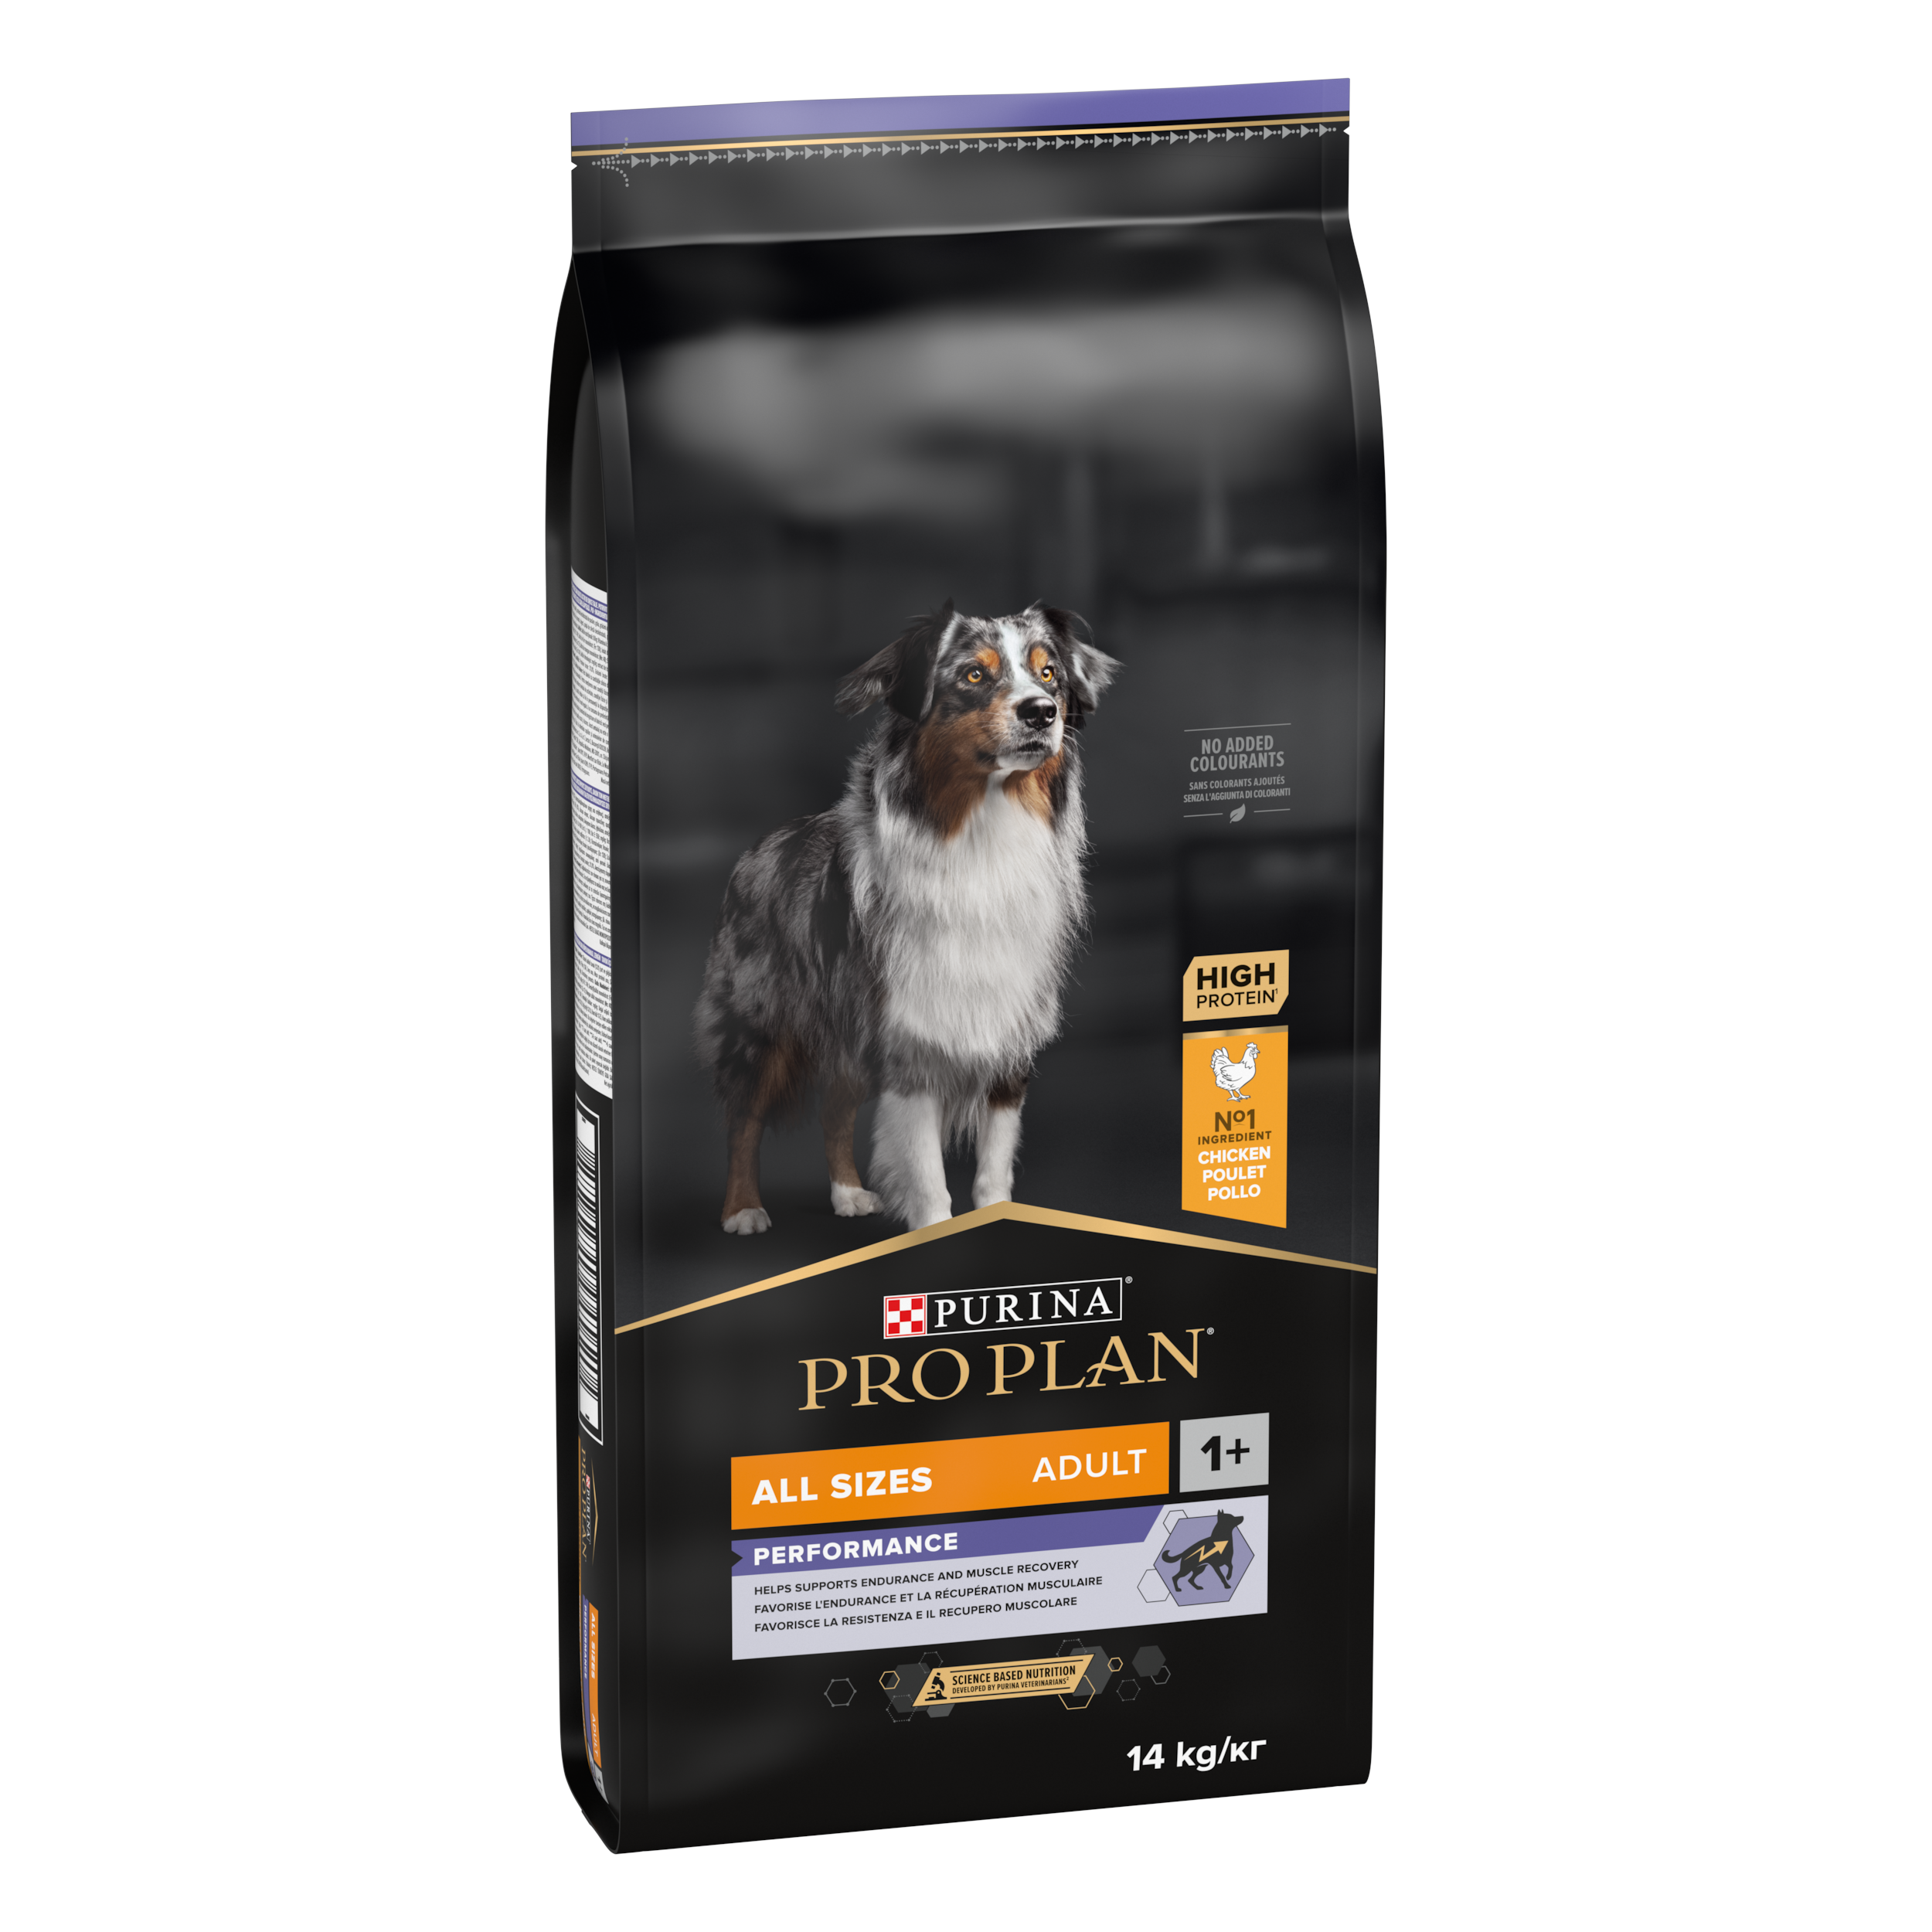 PURINA PRO PLAN ADULT Performance, Toate Taliile, Pui, 14 kg (toate